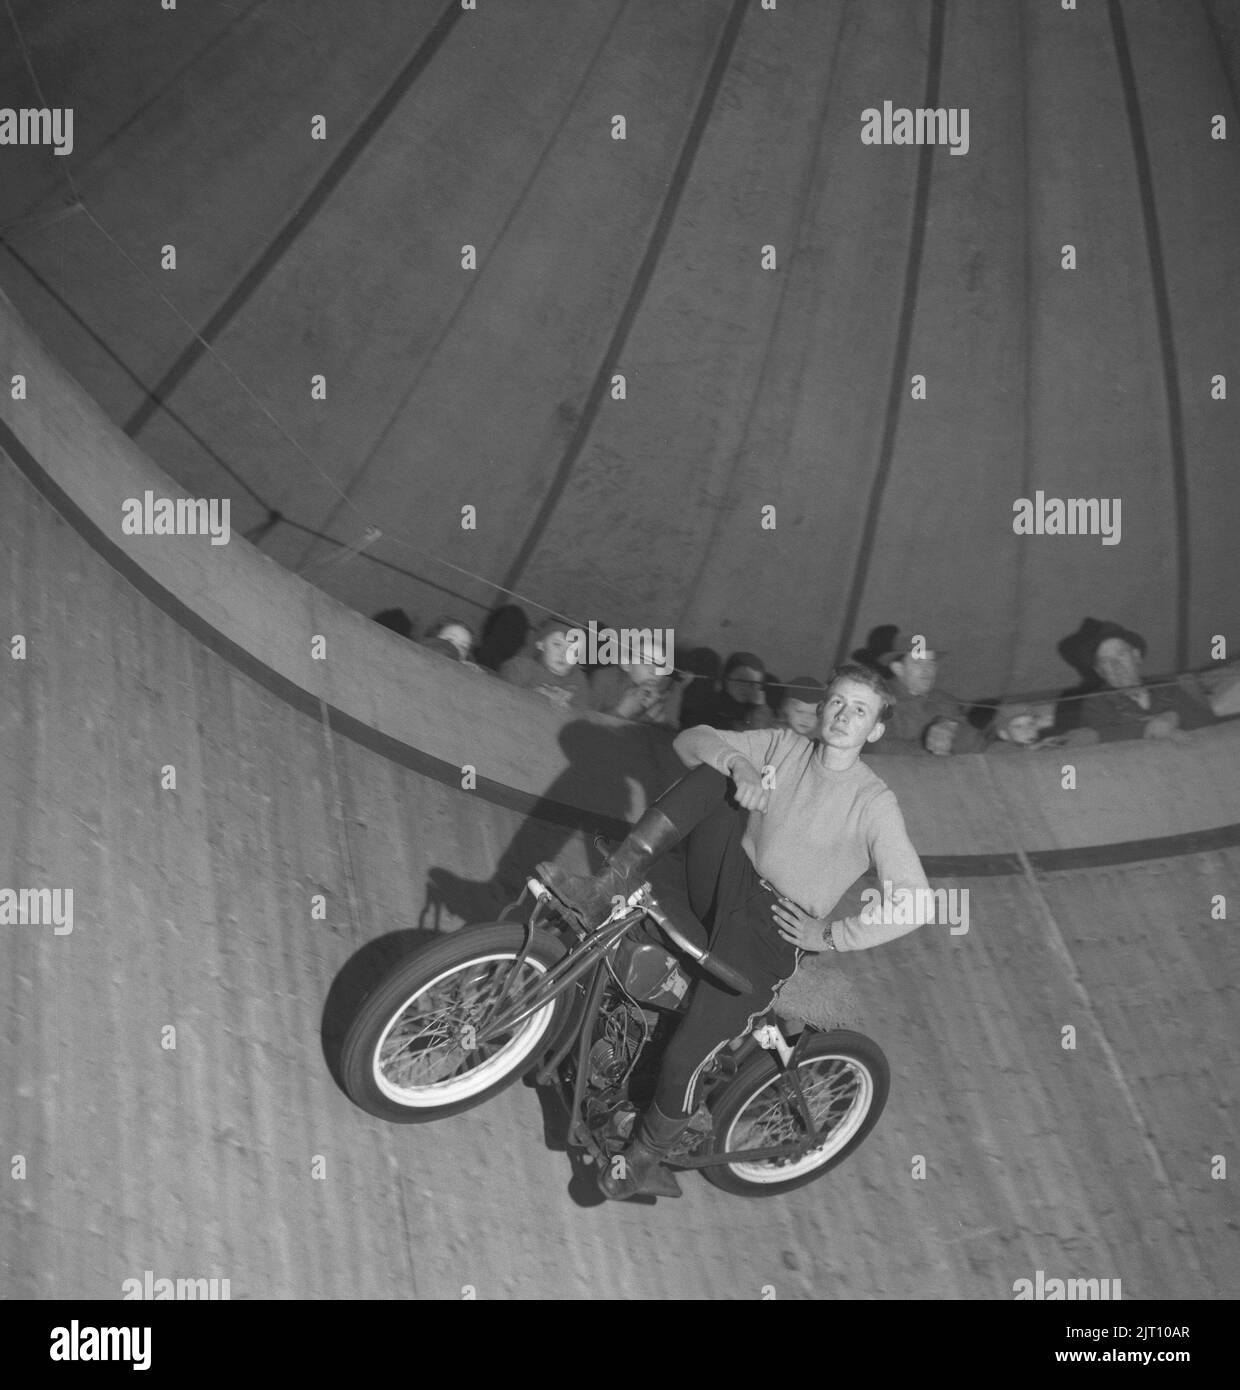 Motorcyclist in the 1940s. A A young man on his motorcycle during a show in The wall of death (sometimes known as The wall of death, motordrome, silodrome. Wall of death is a wooden planked barrel shaped arena where spectators watch from the top as motorcycles or other motorised vehicles ride around it at high speed,often performing other stunts. Sweden 1947 Conard ref 1103 Stock Photo